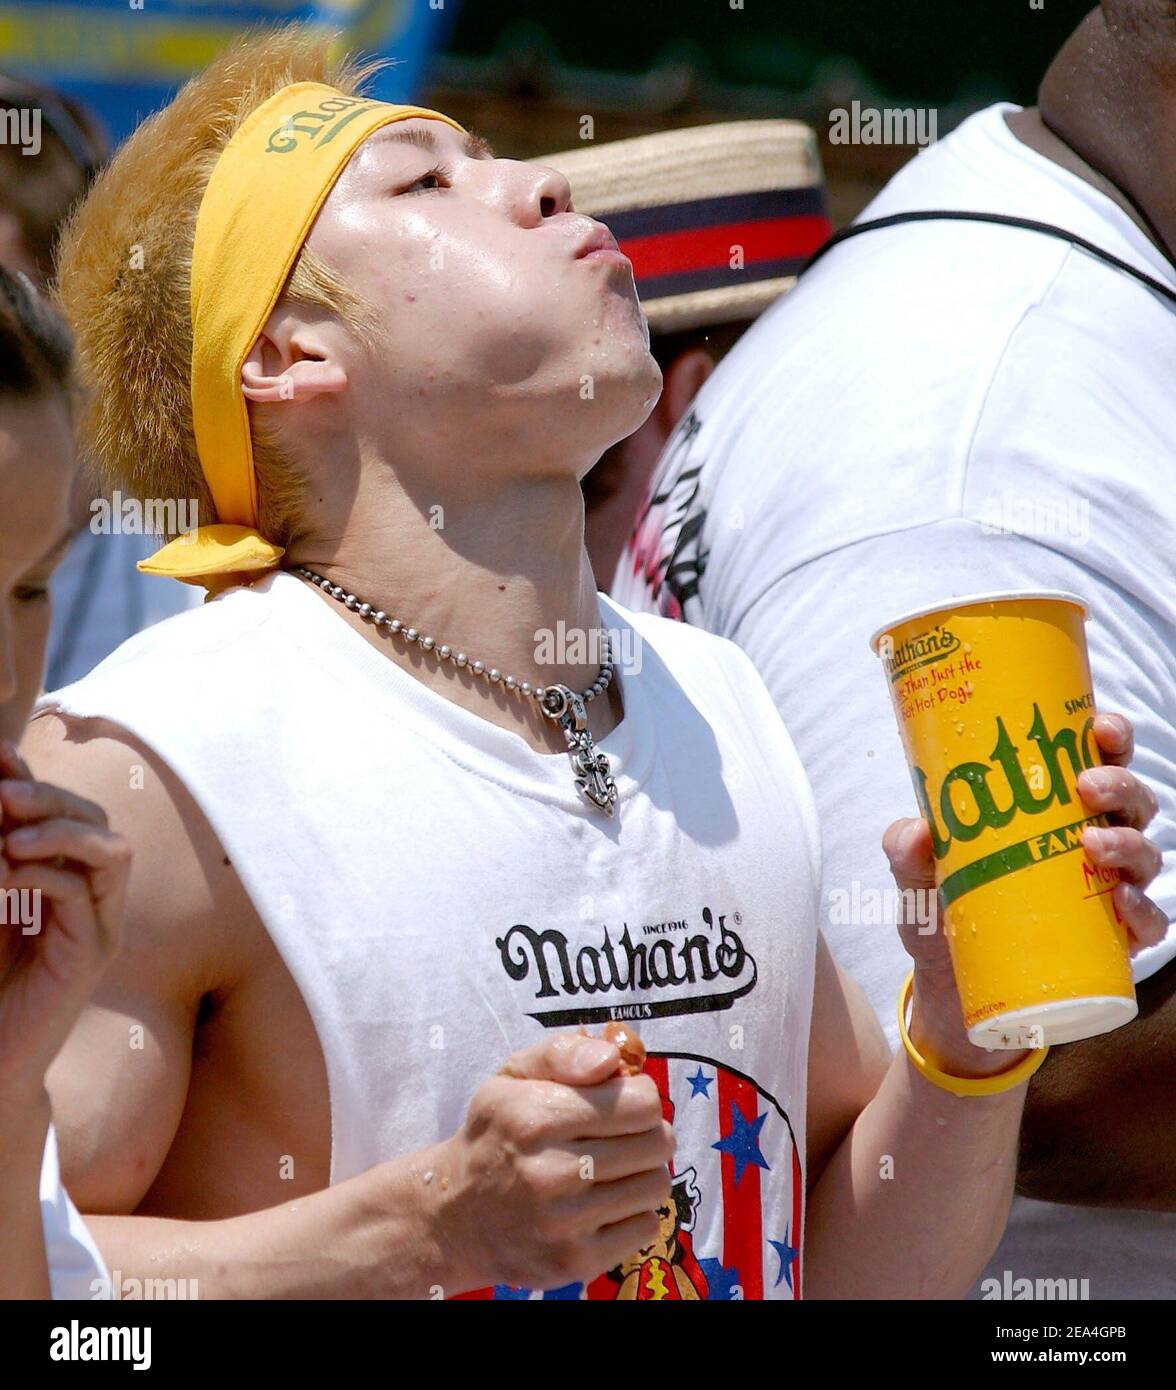 Japan's world champion Takeru Kobayashi gulps down hot dogs during the 2005 Nathan's Famous 4th of July International Hot Dog Eating Contest held in Coney Island, New York City, USA, on Monday July 4, 2005. Photo by Nicolas Khayat/ABACAPRESS.COM Stock Photo